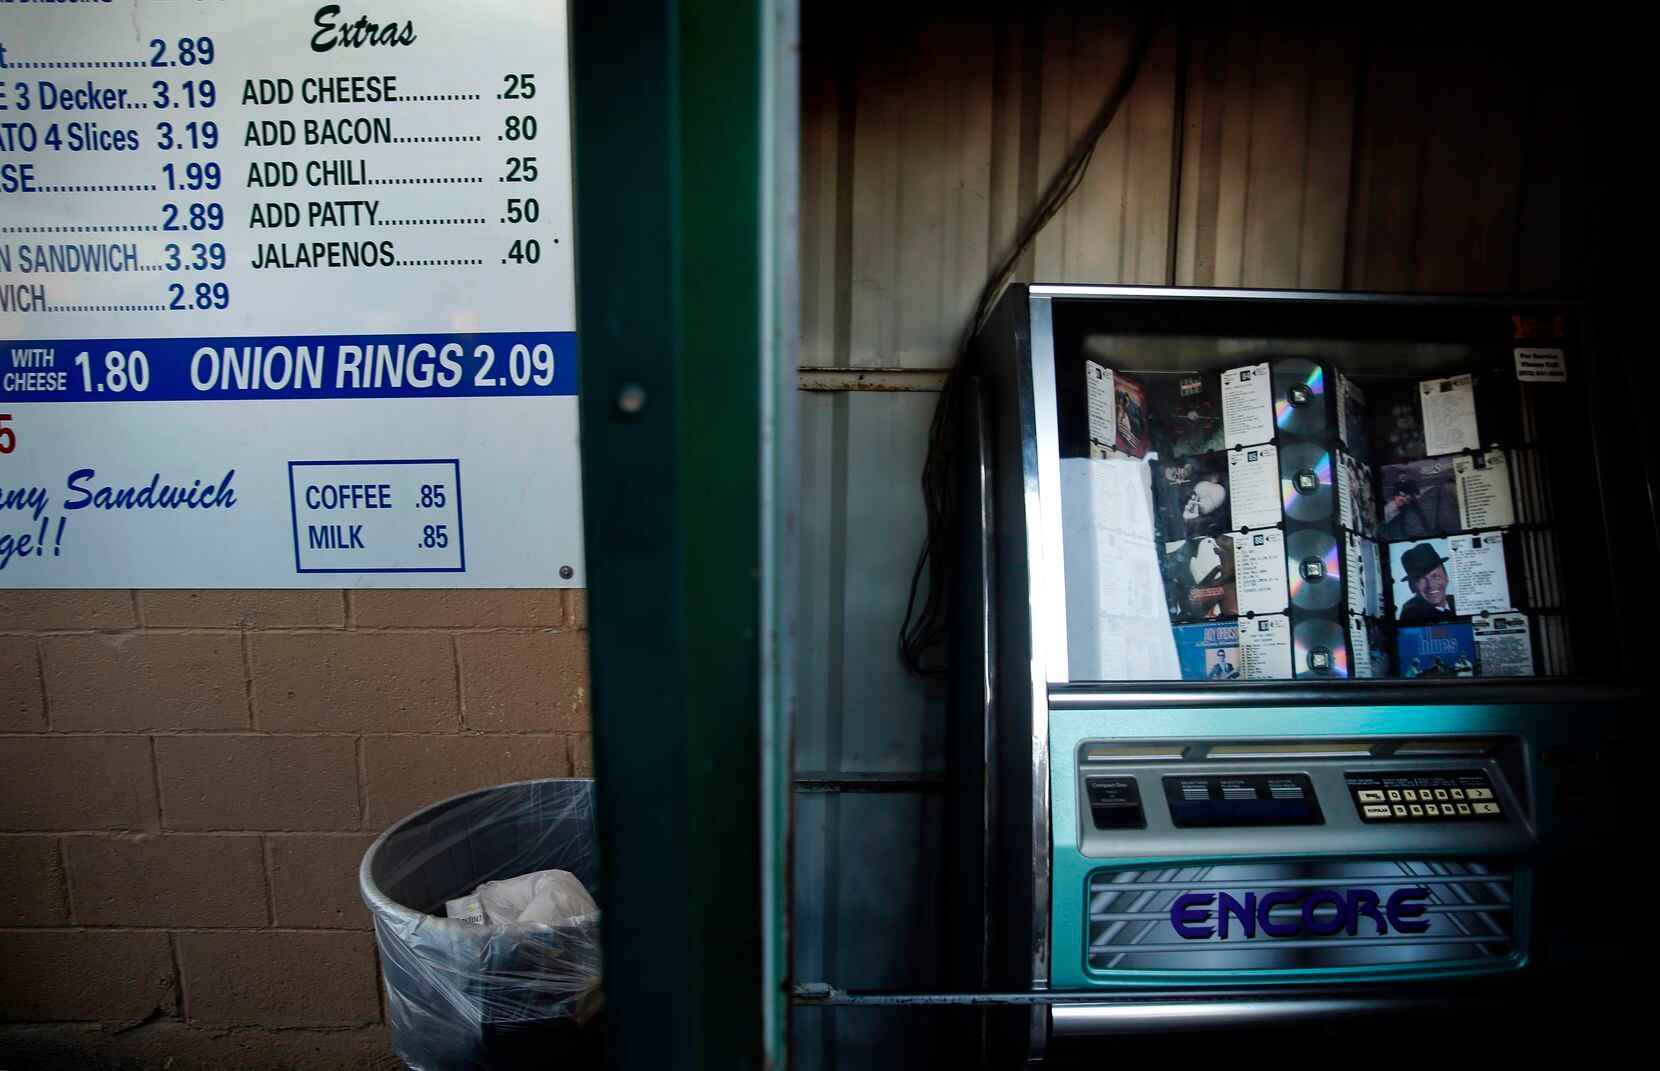 An old juke box is housed in a shed outside Keller's Drive-In.